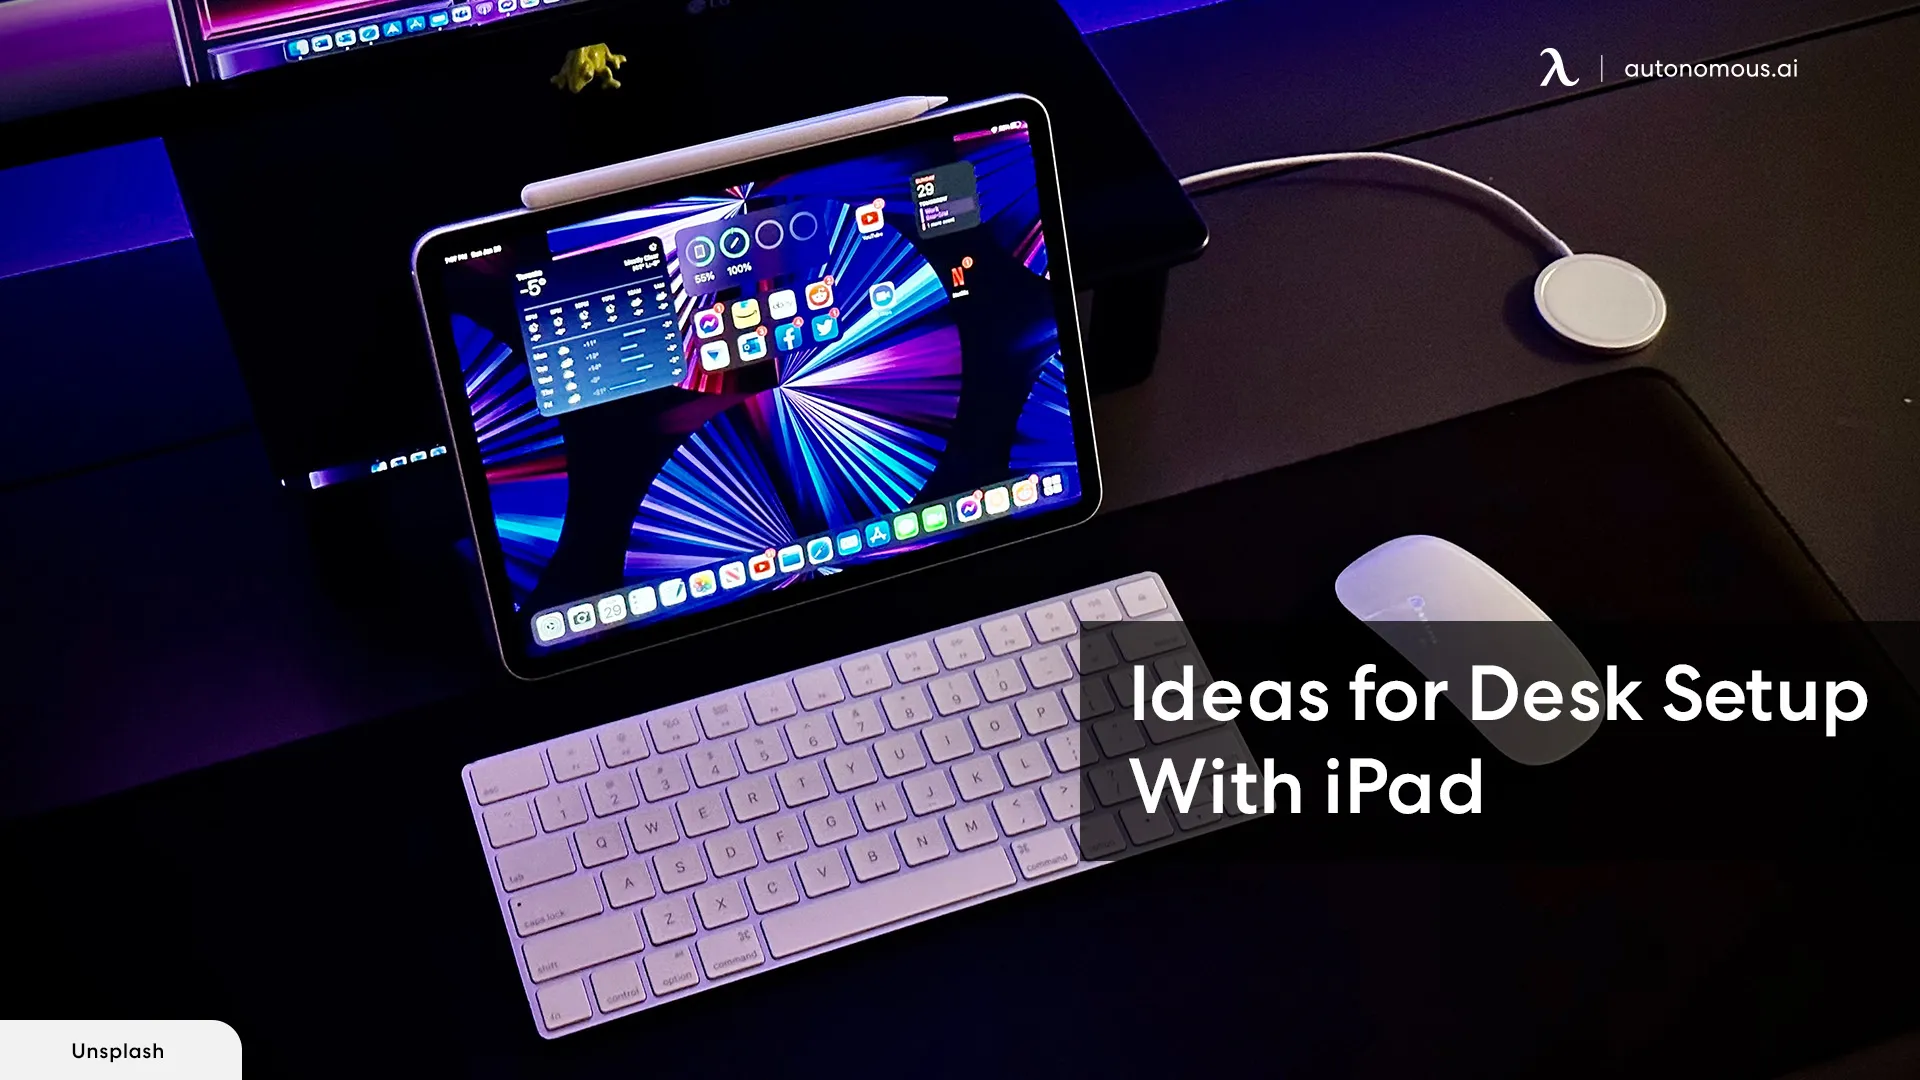 Ideas for Desk Setup With iPad to Power Your Home Office